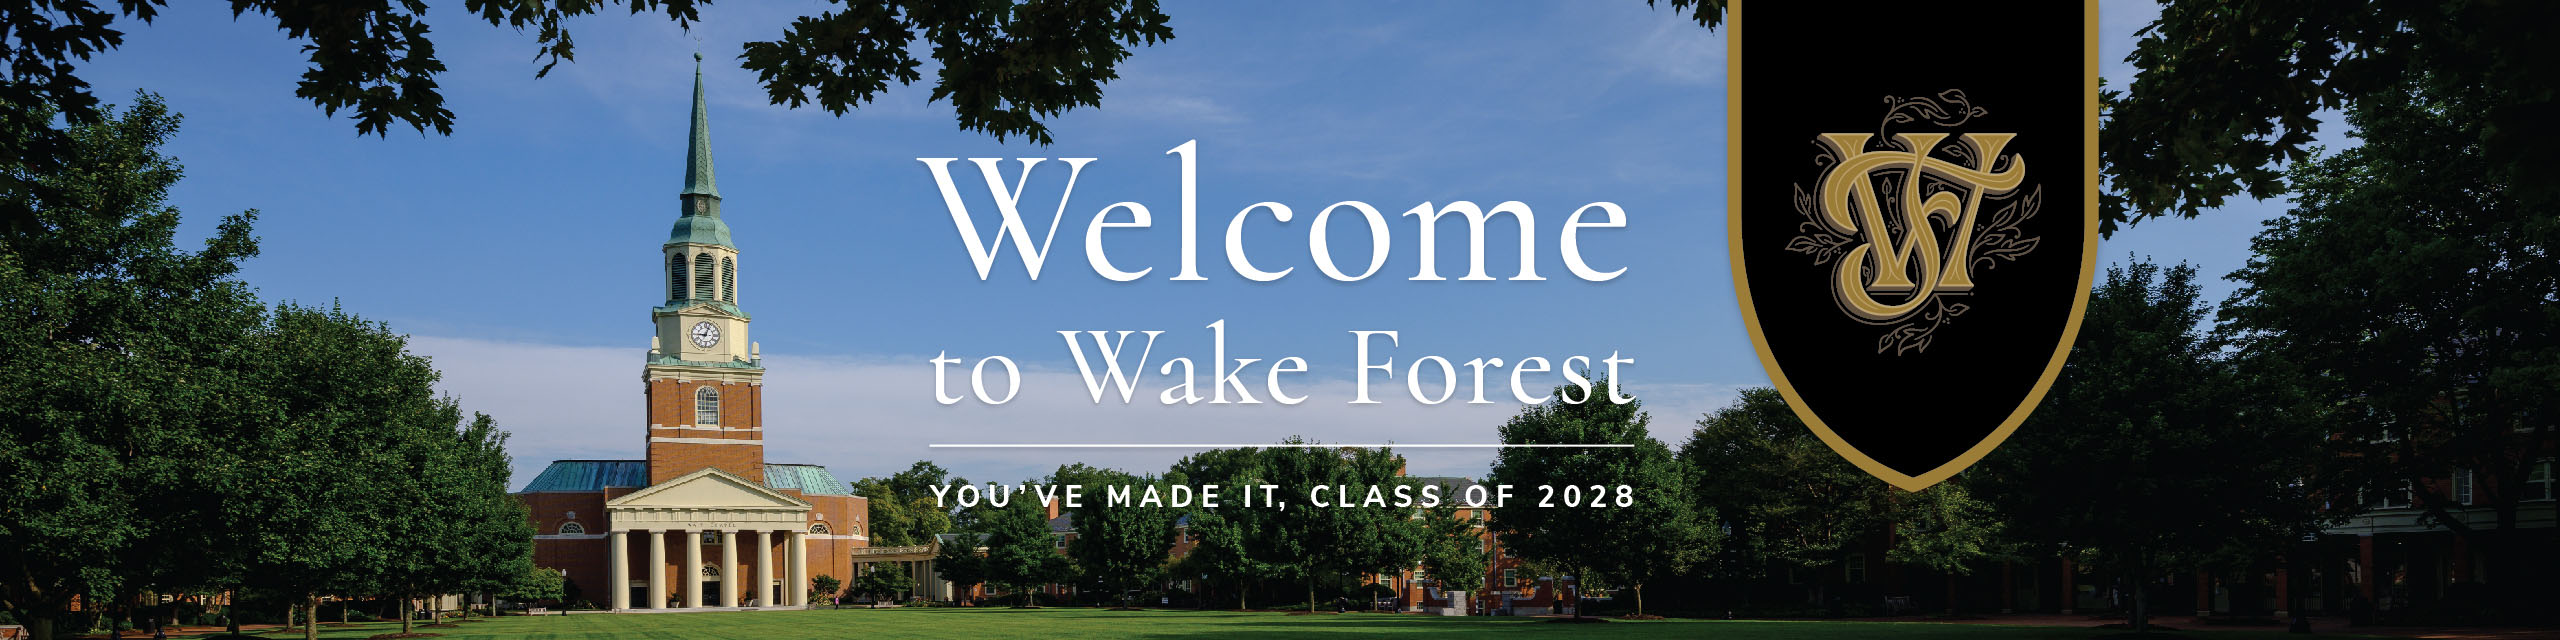 Class of 2028: Welcome to Wake Forest!